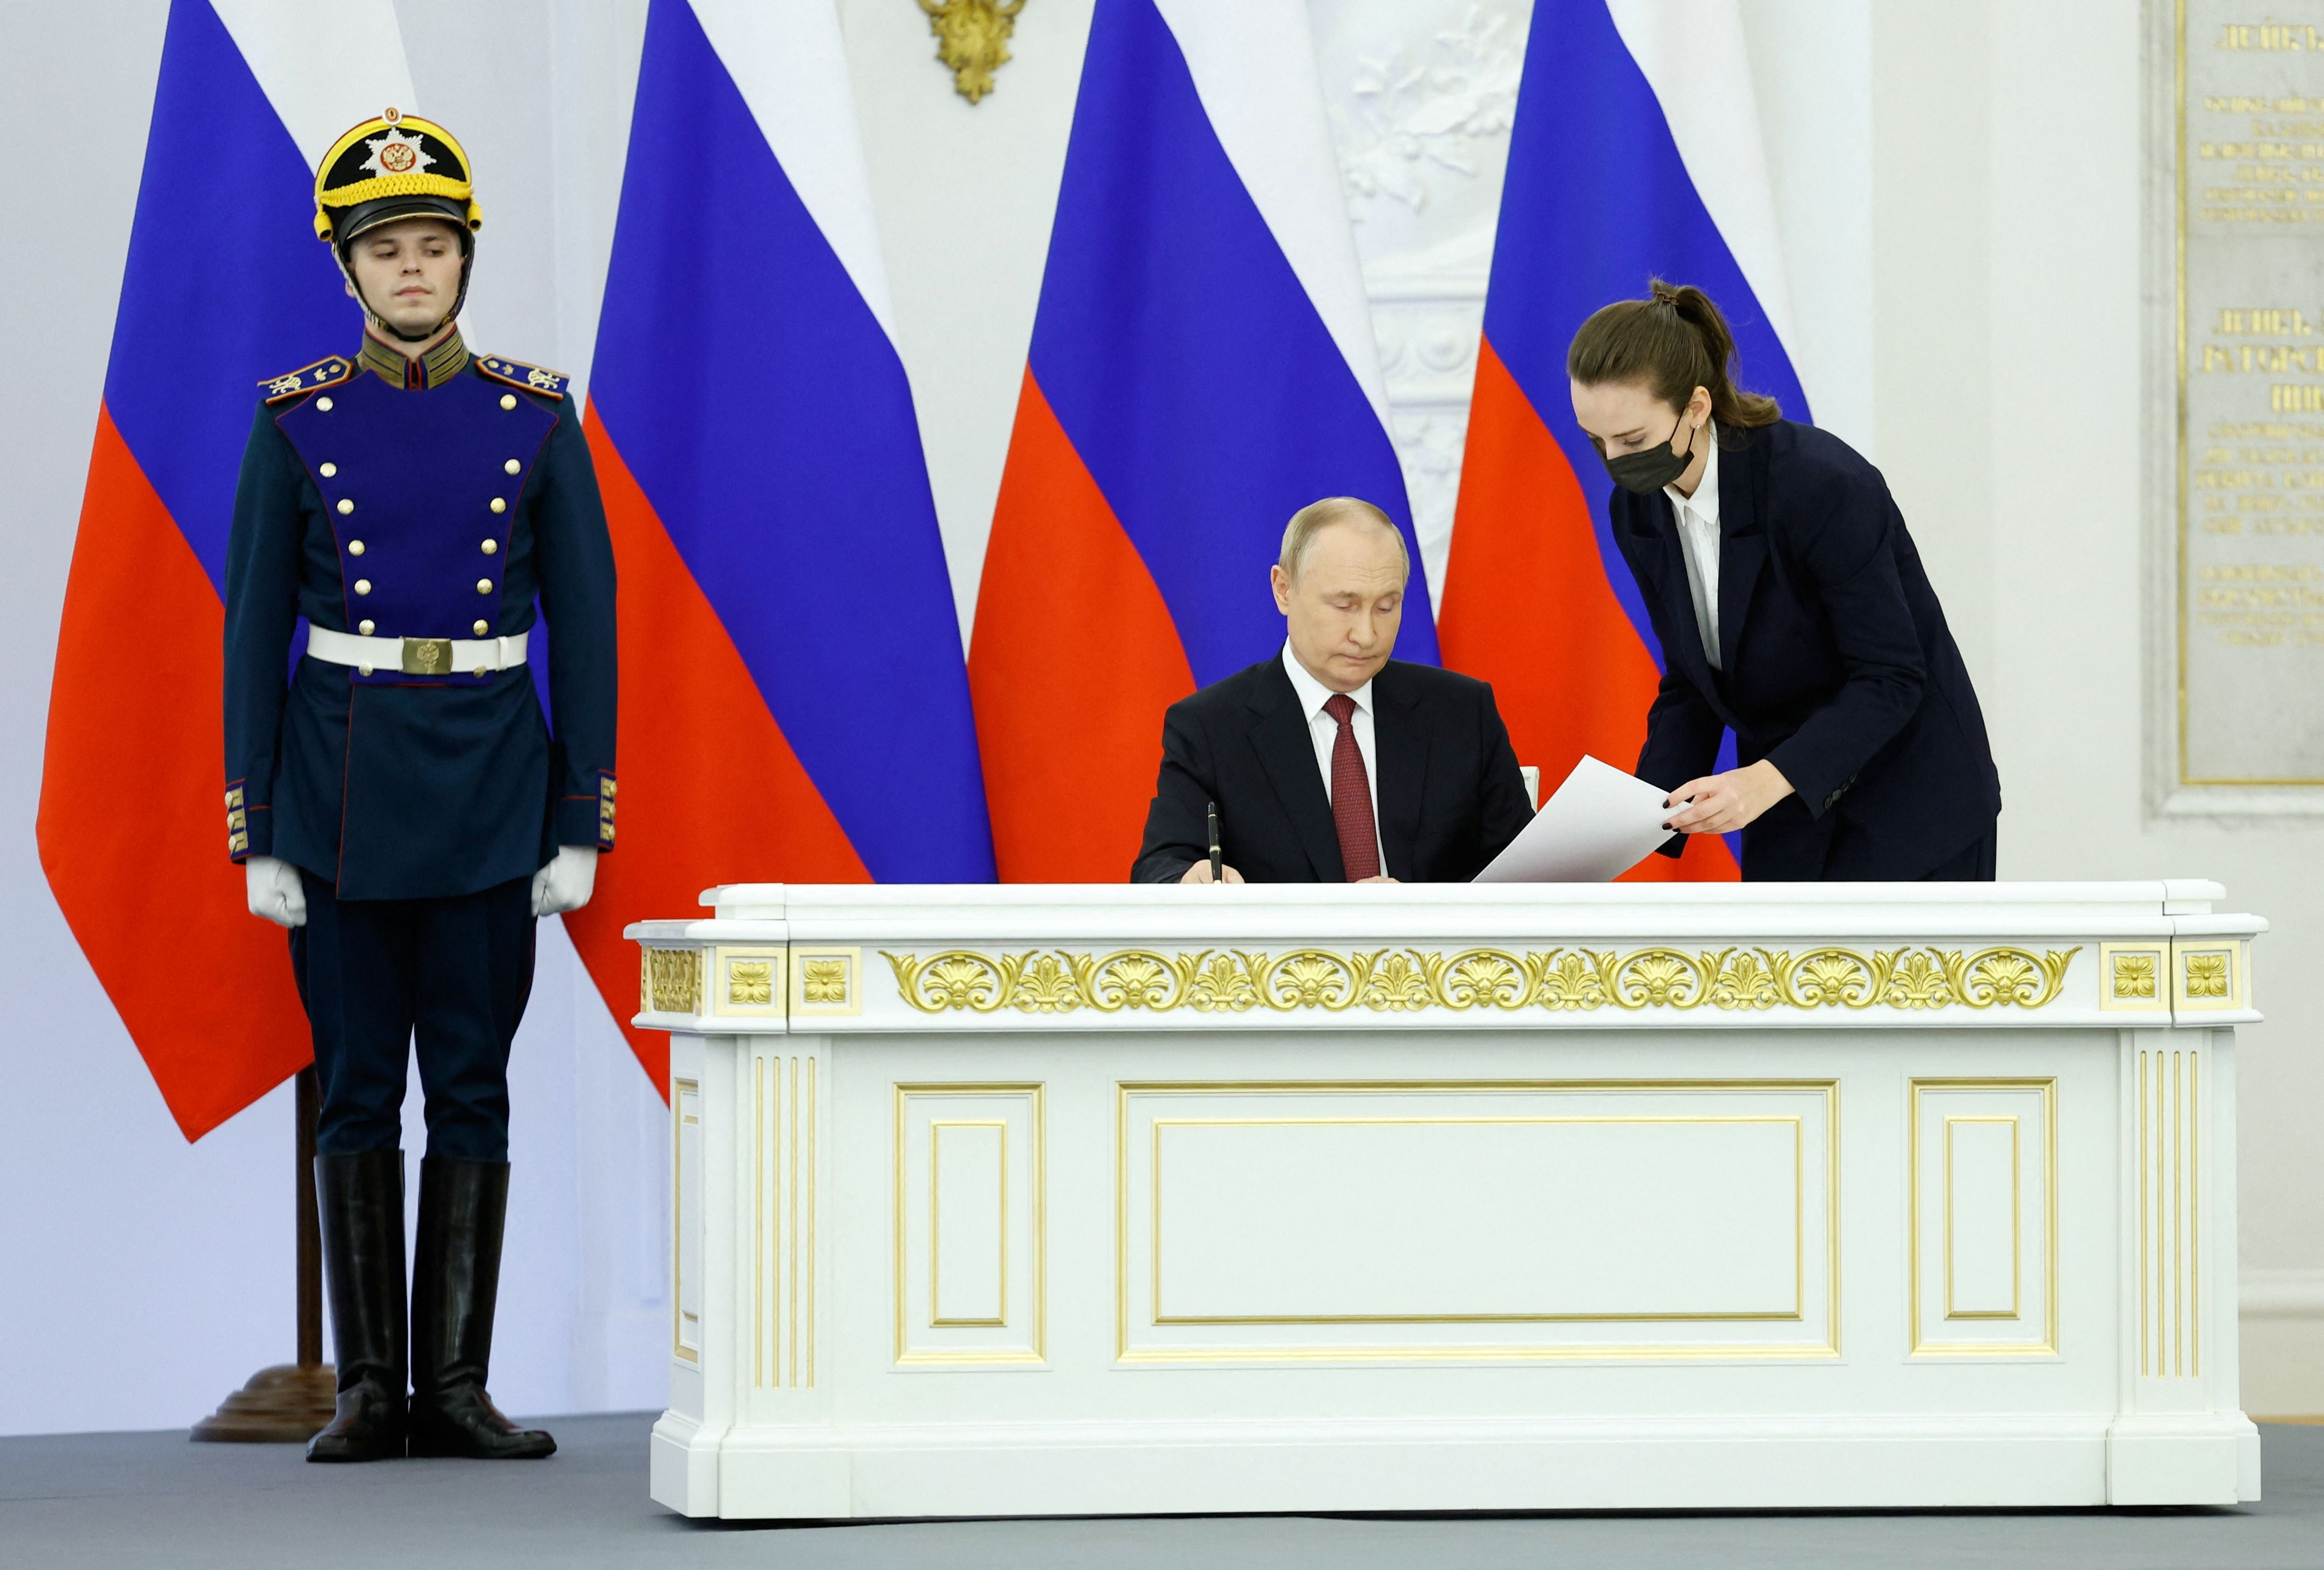 Russian President Vladimir Putin attends a ceremony to sign treaties formally annexing four regions of Ukraine